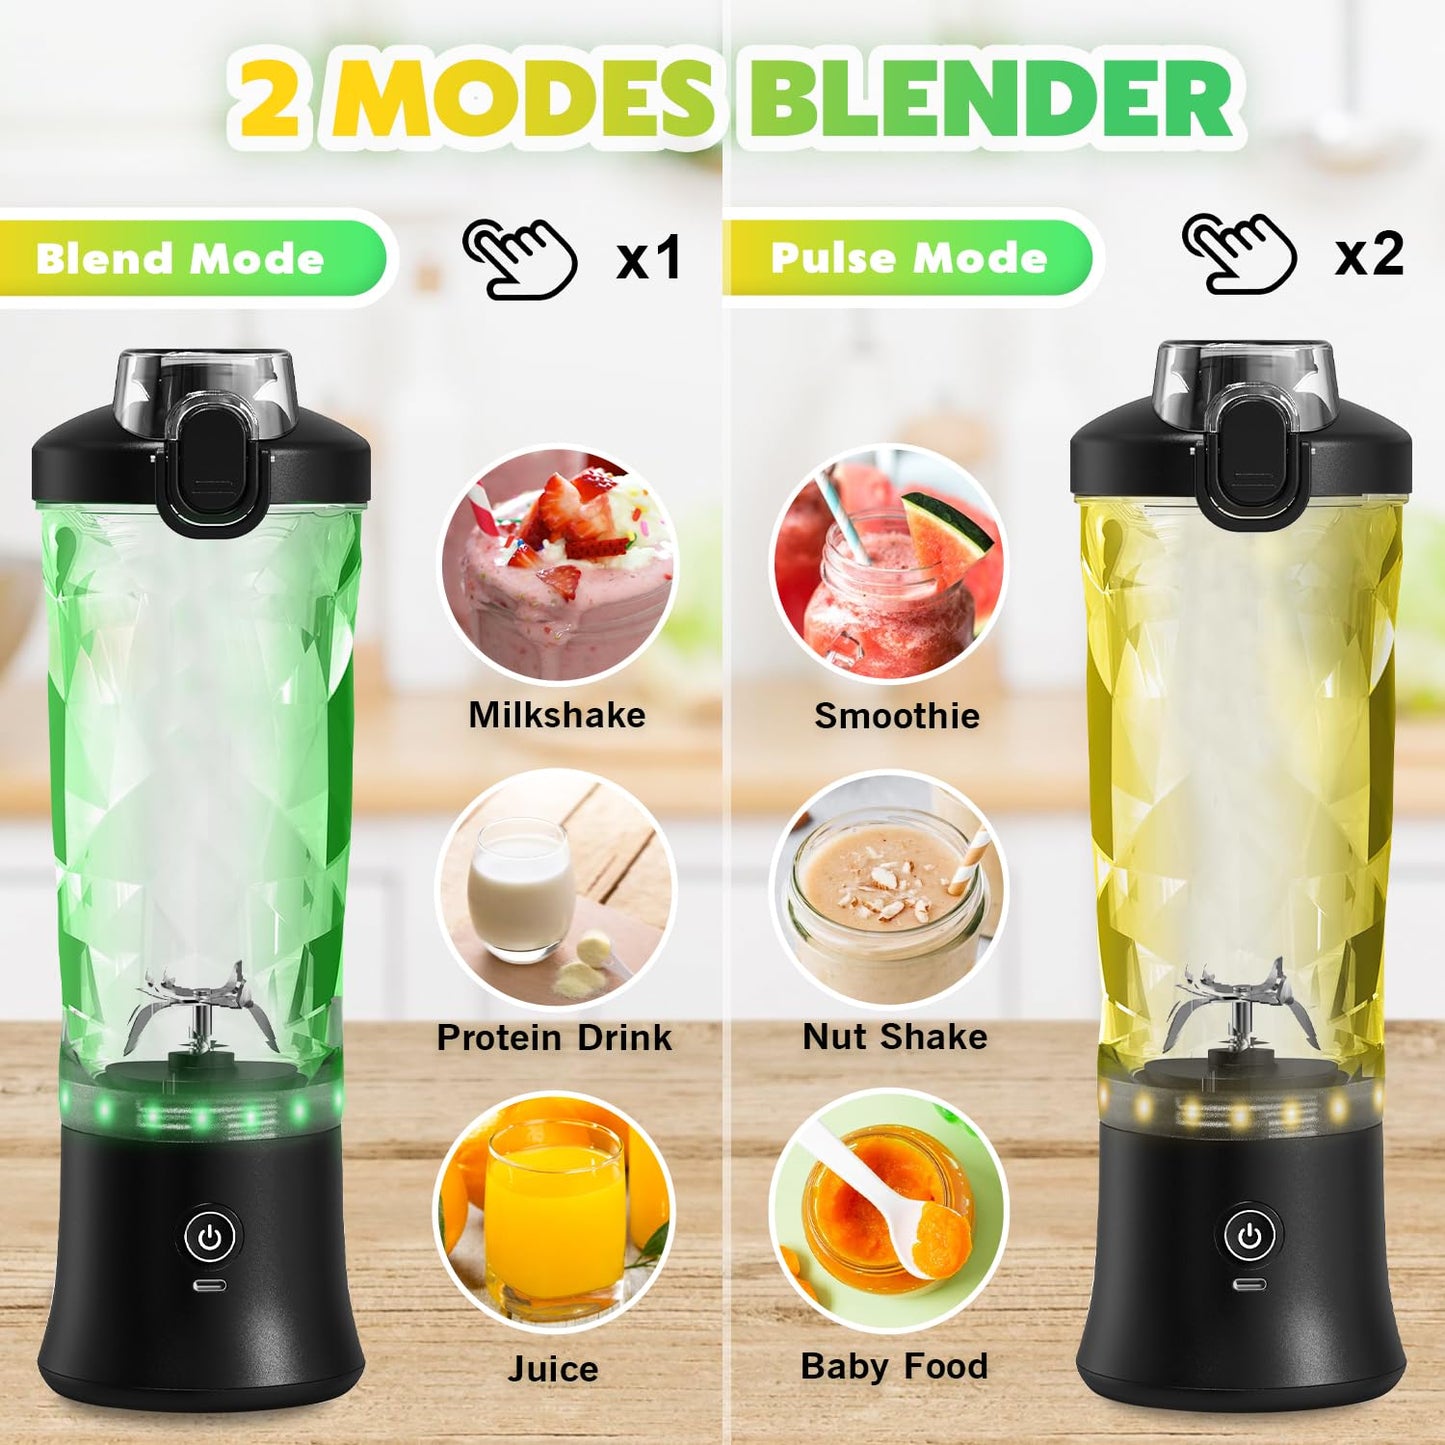 Portable Blender Personal Juicer with Insulated Sleeve for Shakes and Smoothies - 20 OZ Mini Blender Cup with 6 Blades, Travel Lid, USB Rechargeable - Small Blender for Kitchen, Travel, Office, Gym